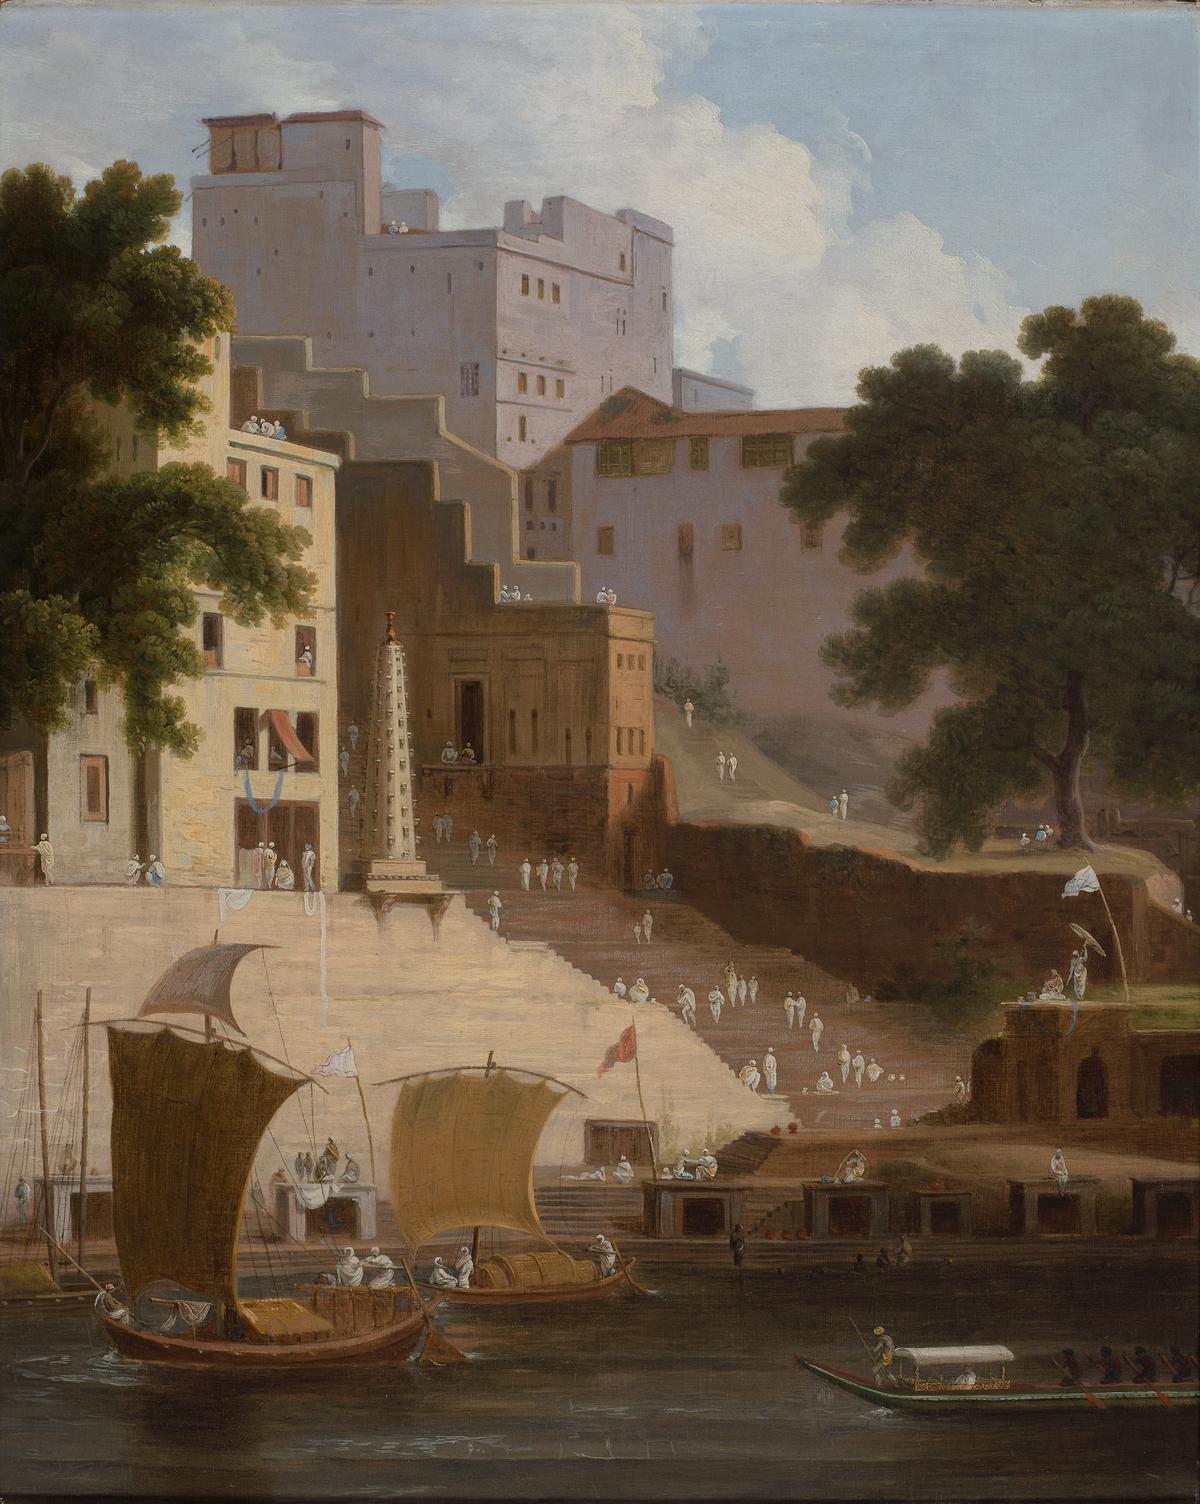  Thomas Daniell’s rendition of the ghats